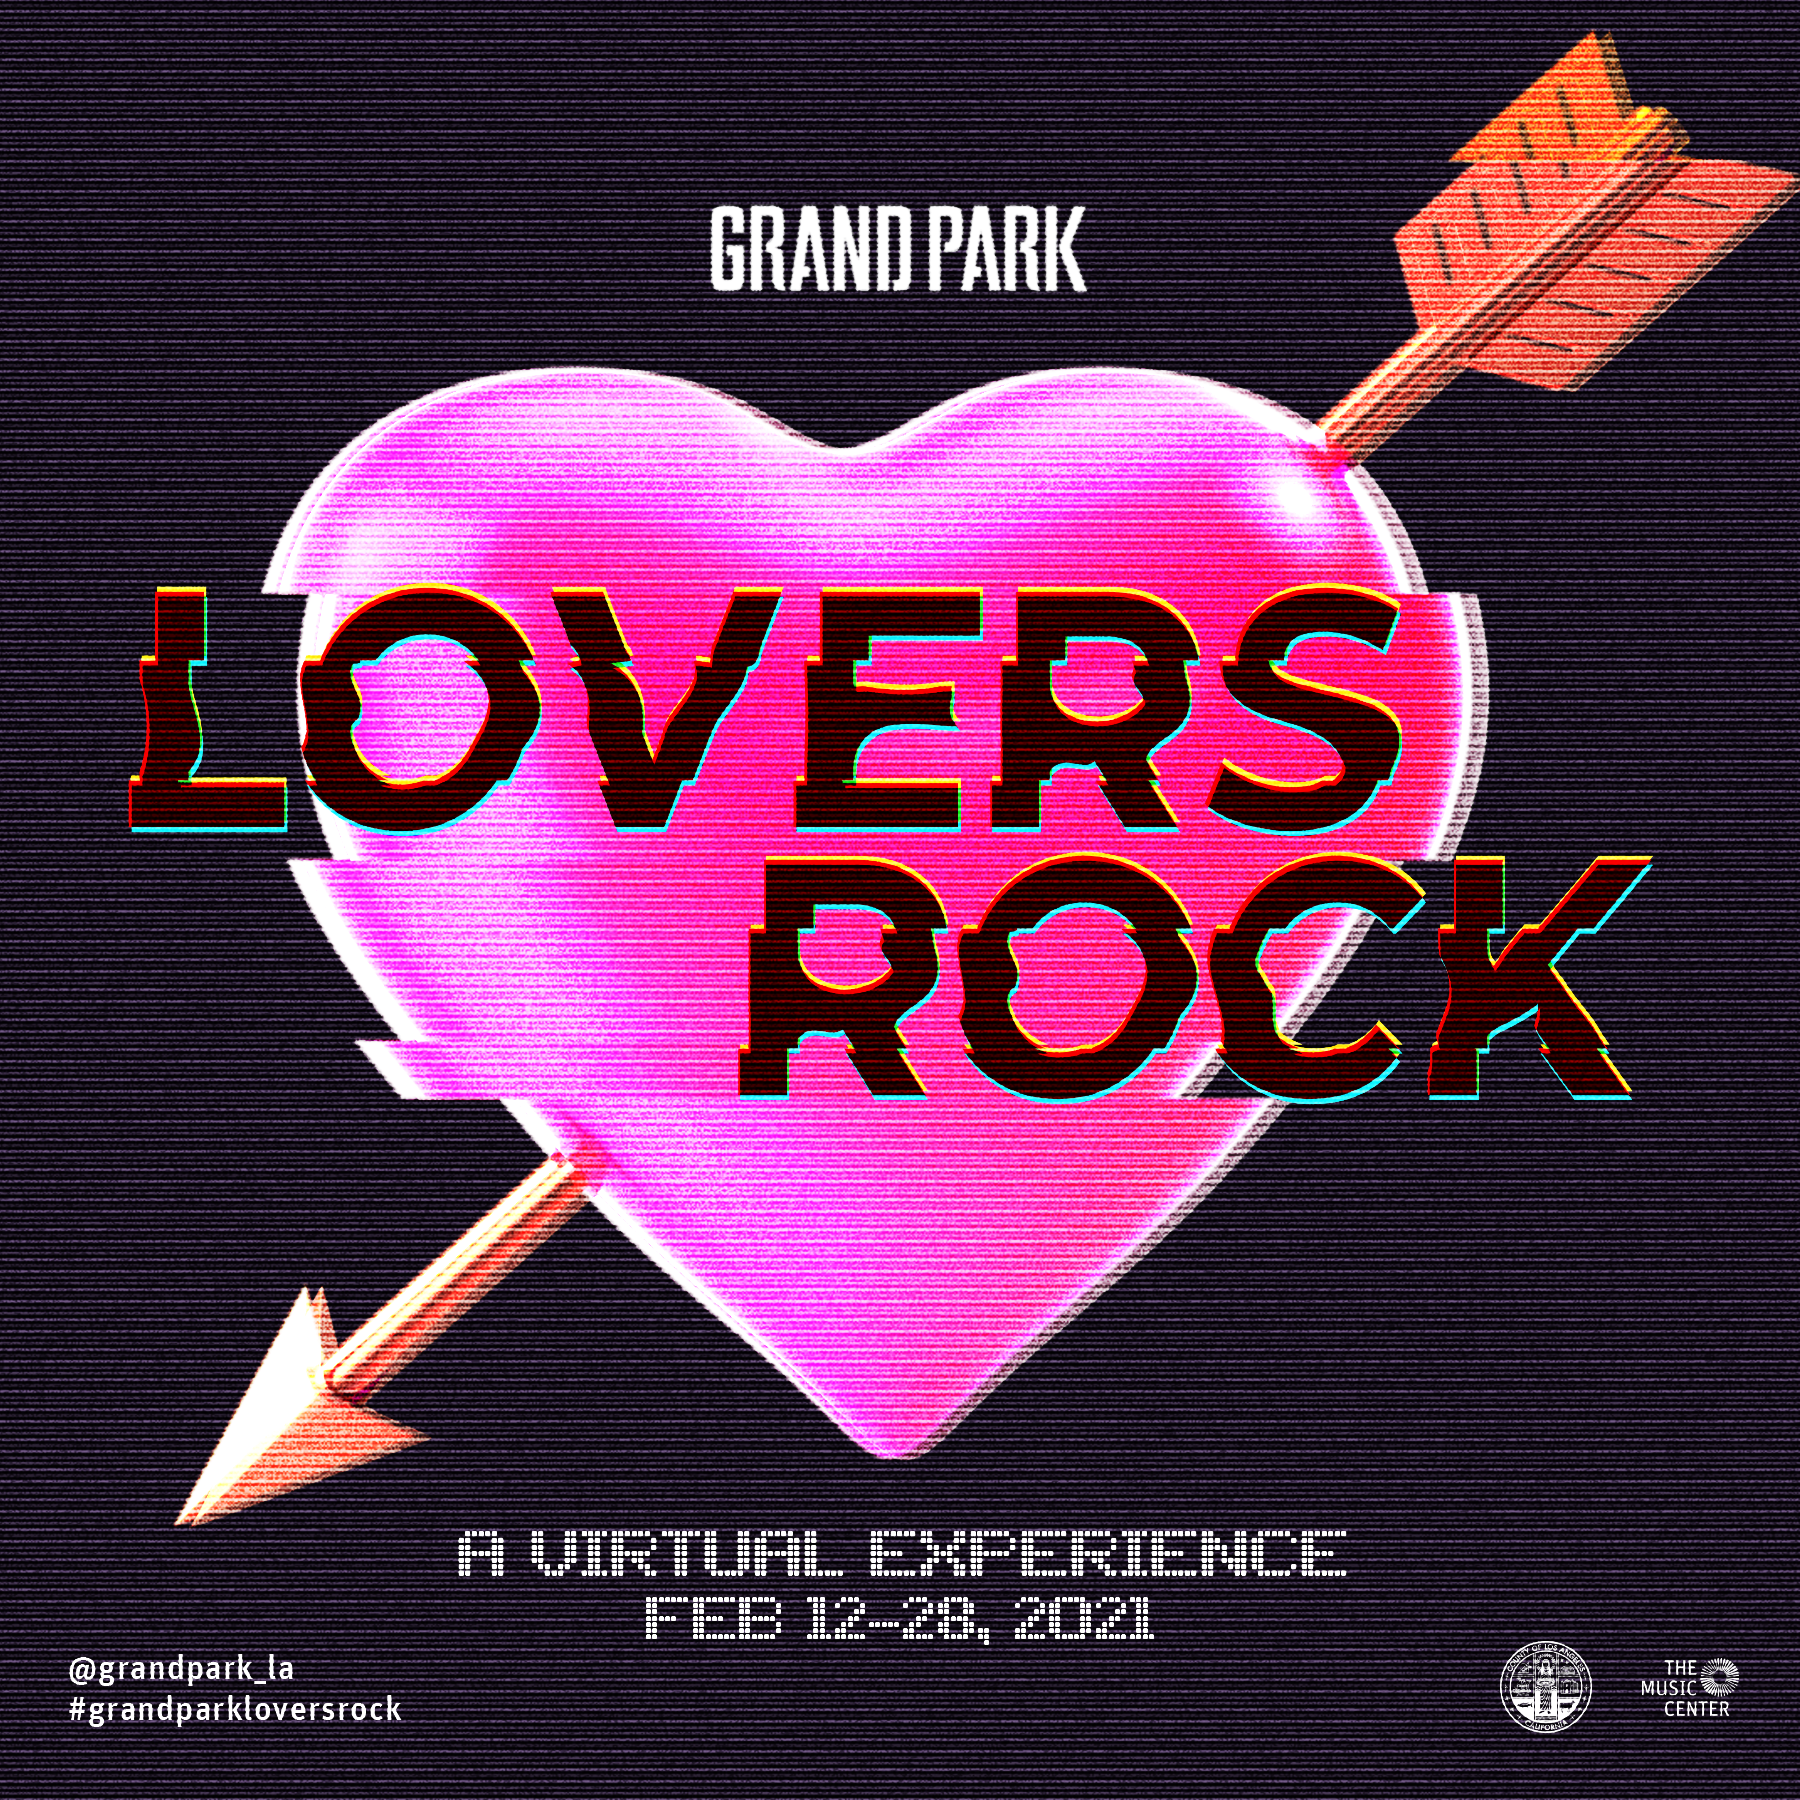 Grand Park Lovers Rock A Virtual Experience February 12-28, 2021